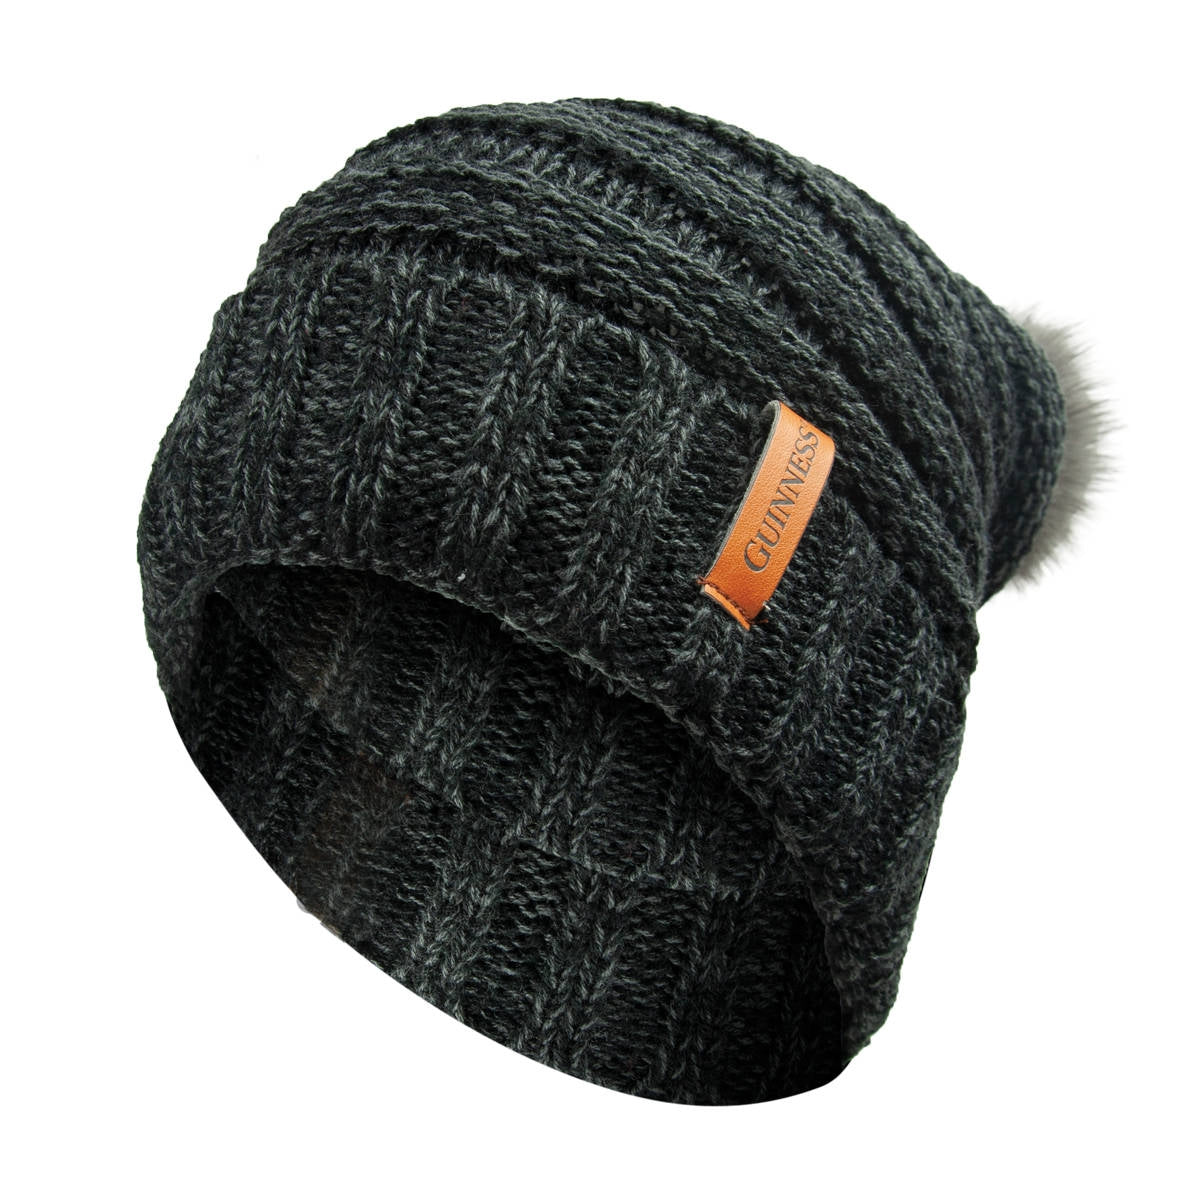 Stay cozy during the winter months with this Guinness Dark Grey Slouchy Bauble Beanie with Brown Leather Patch. Featuring a fur pom, this Guinness Bobble Hat is the perfect accessory to keep you warm and stylish.